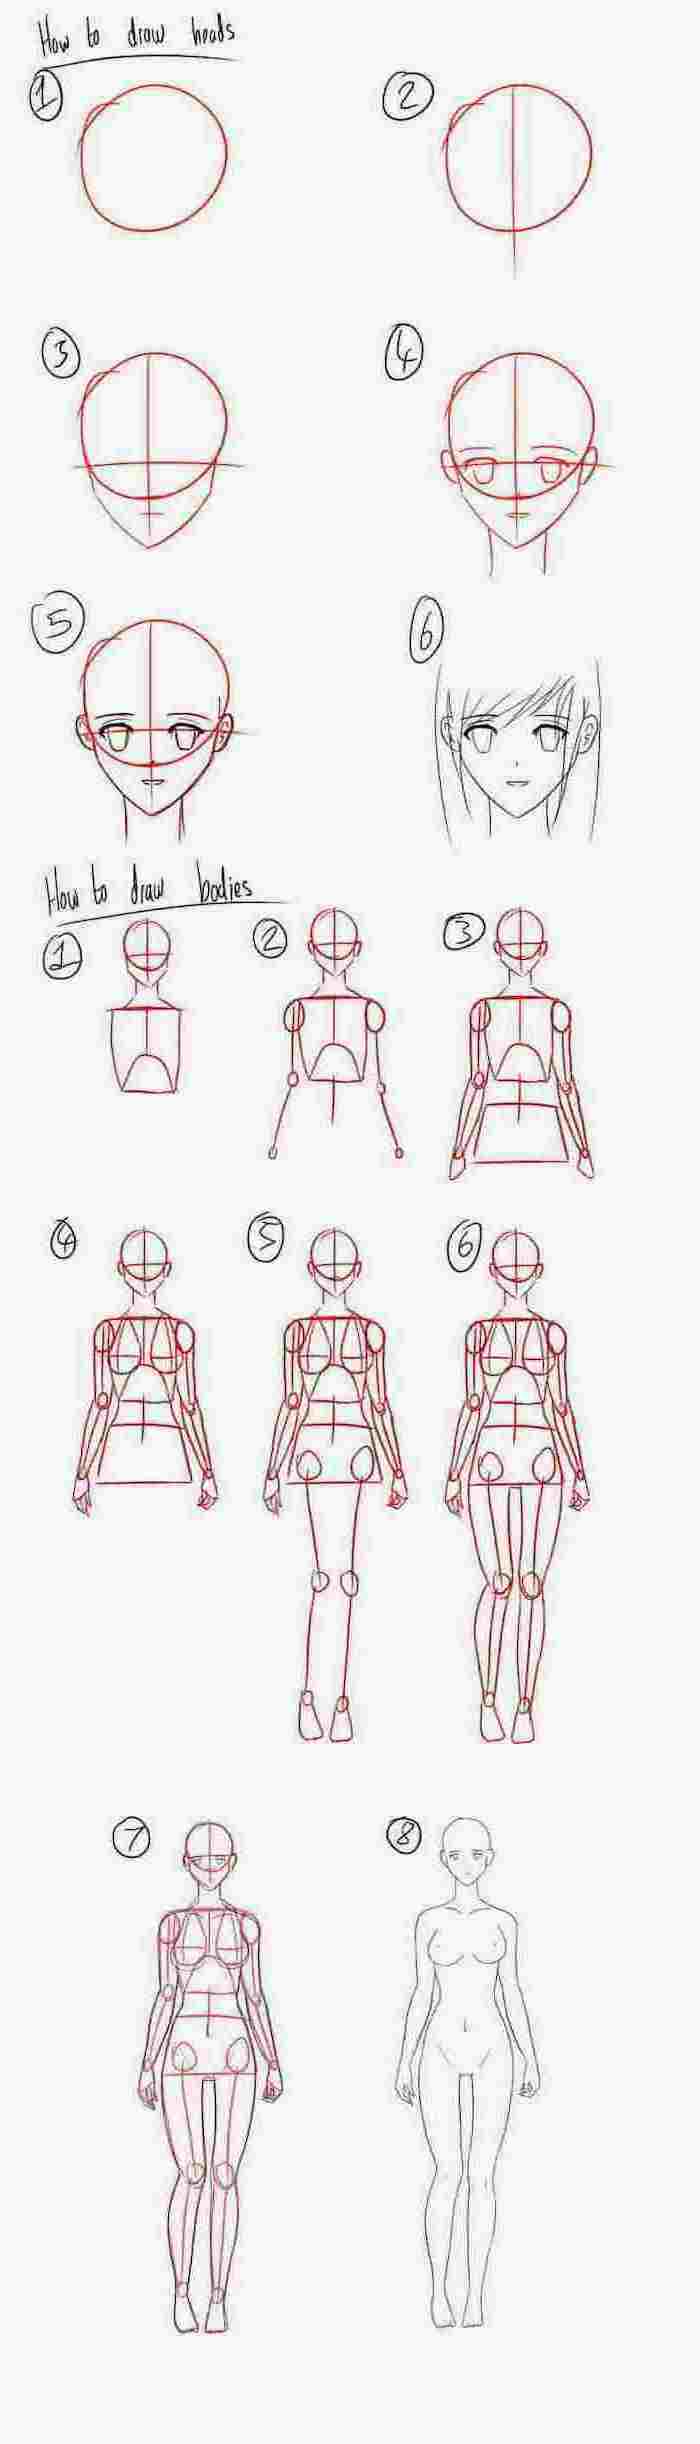 how to draw heads and body, anime sketch, step by step, drawing tutorial